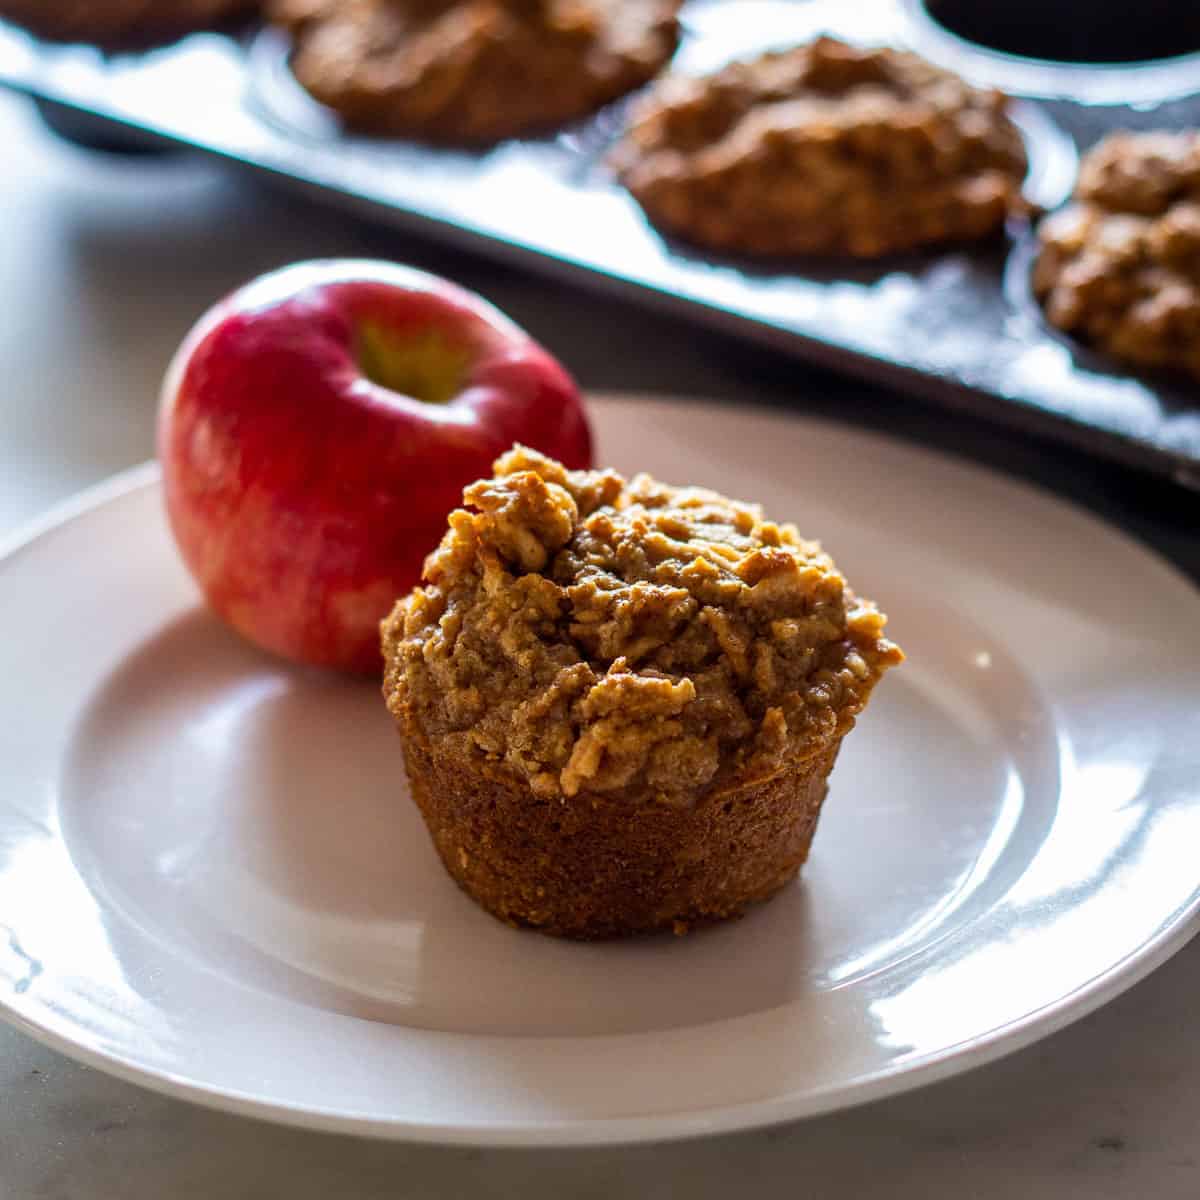 One fresh apple muffin placed on a white plate with an apple. Muffin tin filled with muffins is visible in background.